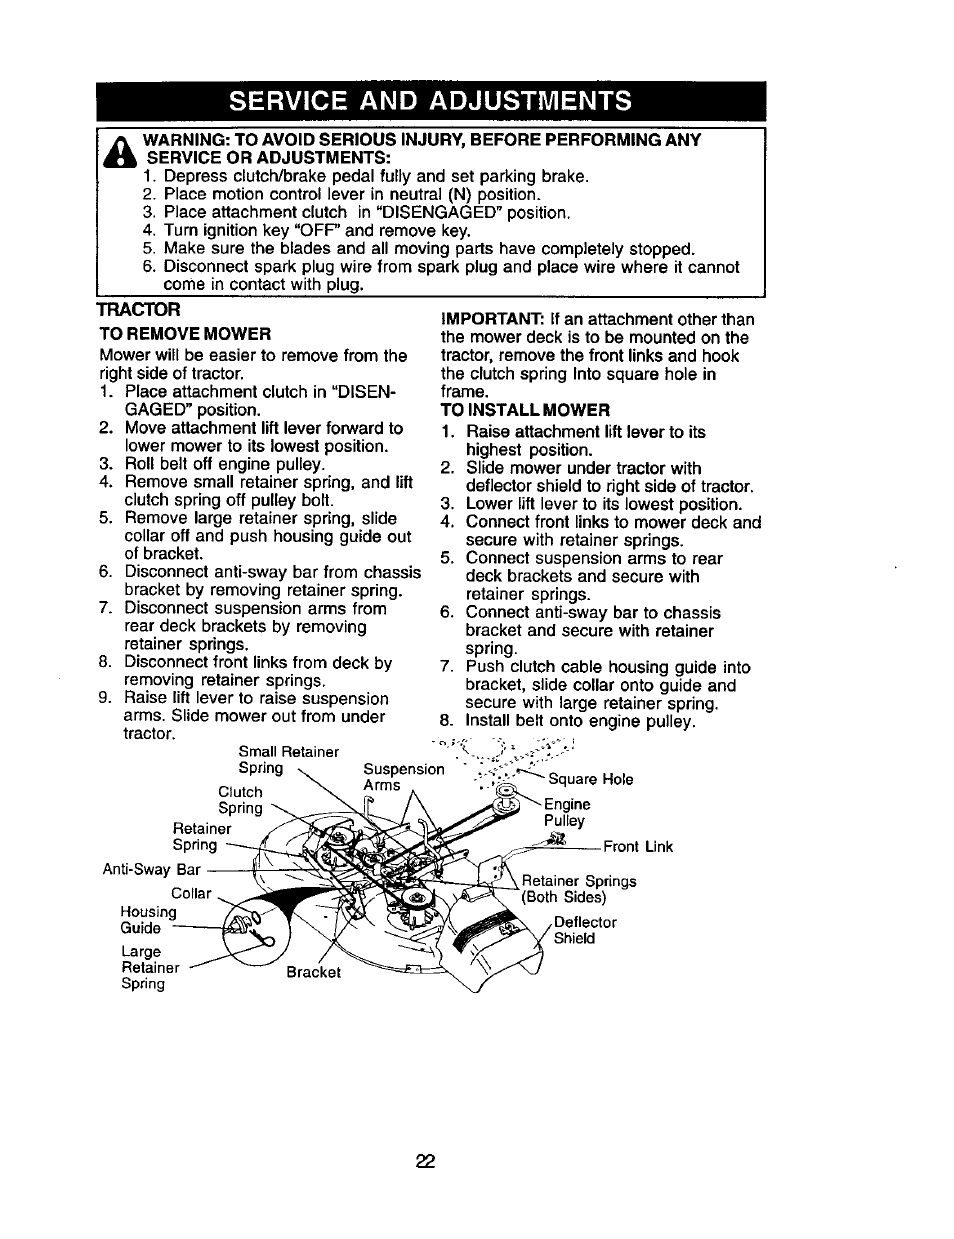 Service and adjustments | Craftsman 917.272068 User Manual | Page 22 / 64